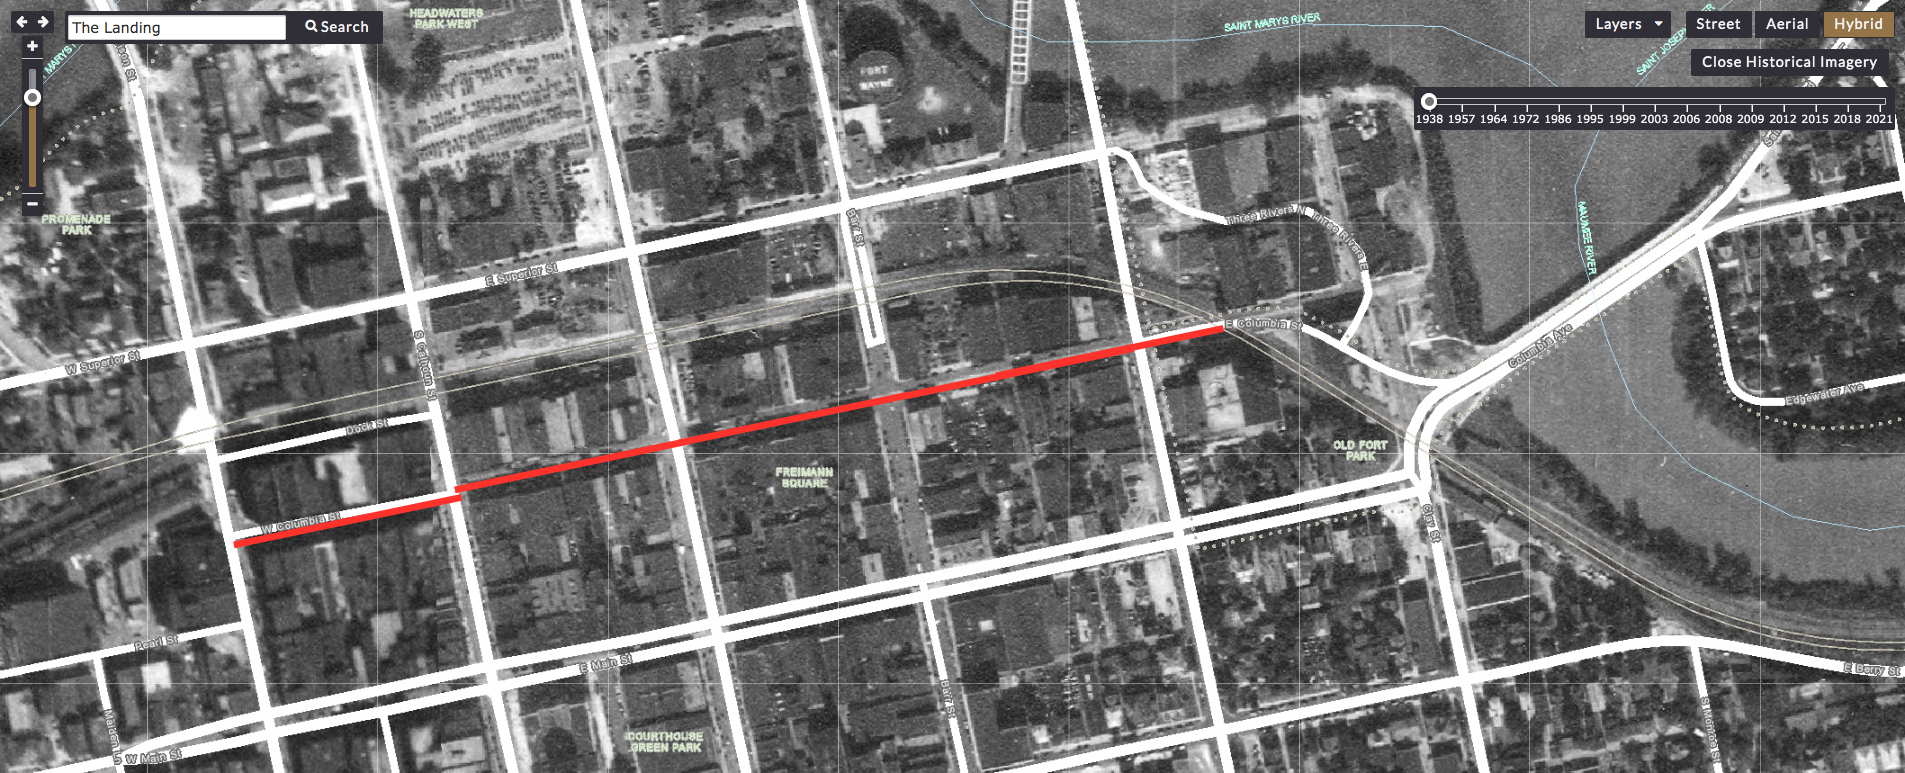 An ariel view of The Landing from 1938 shows Columbia Street (in red) stretching for five blocks.